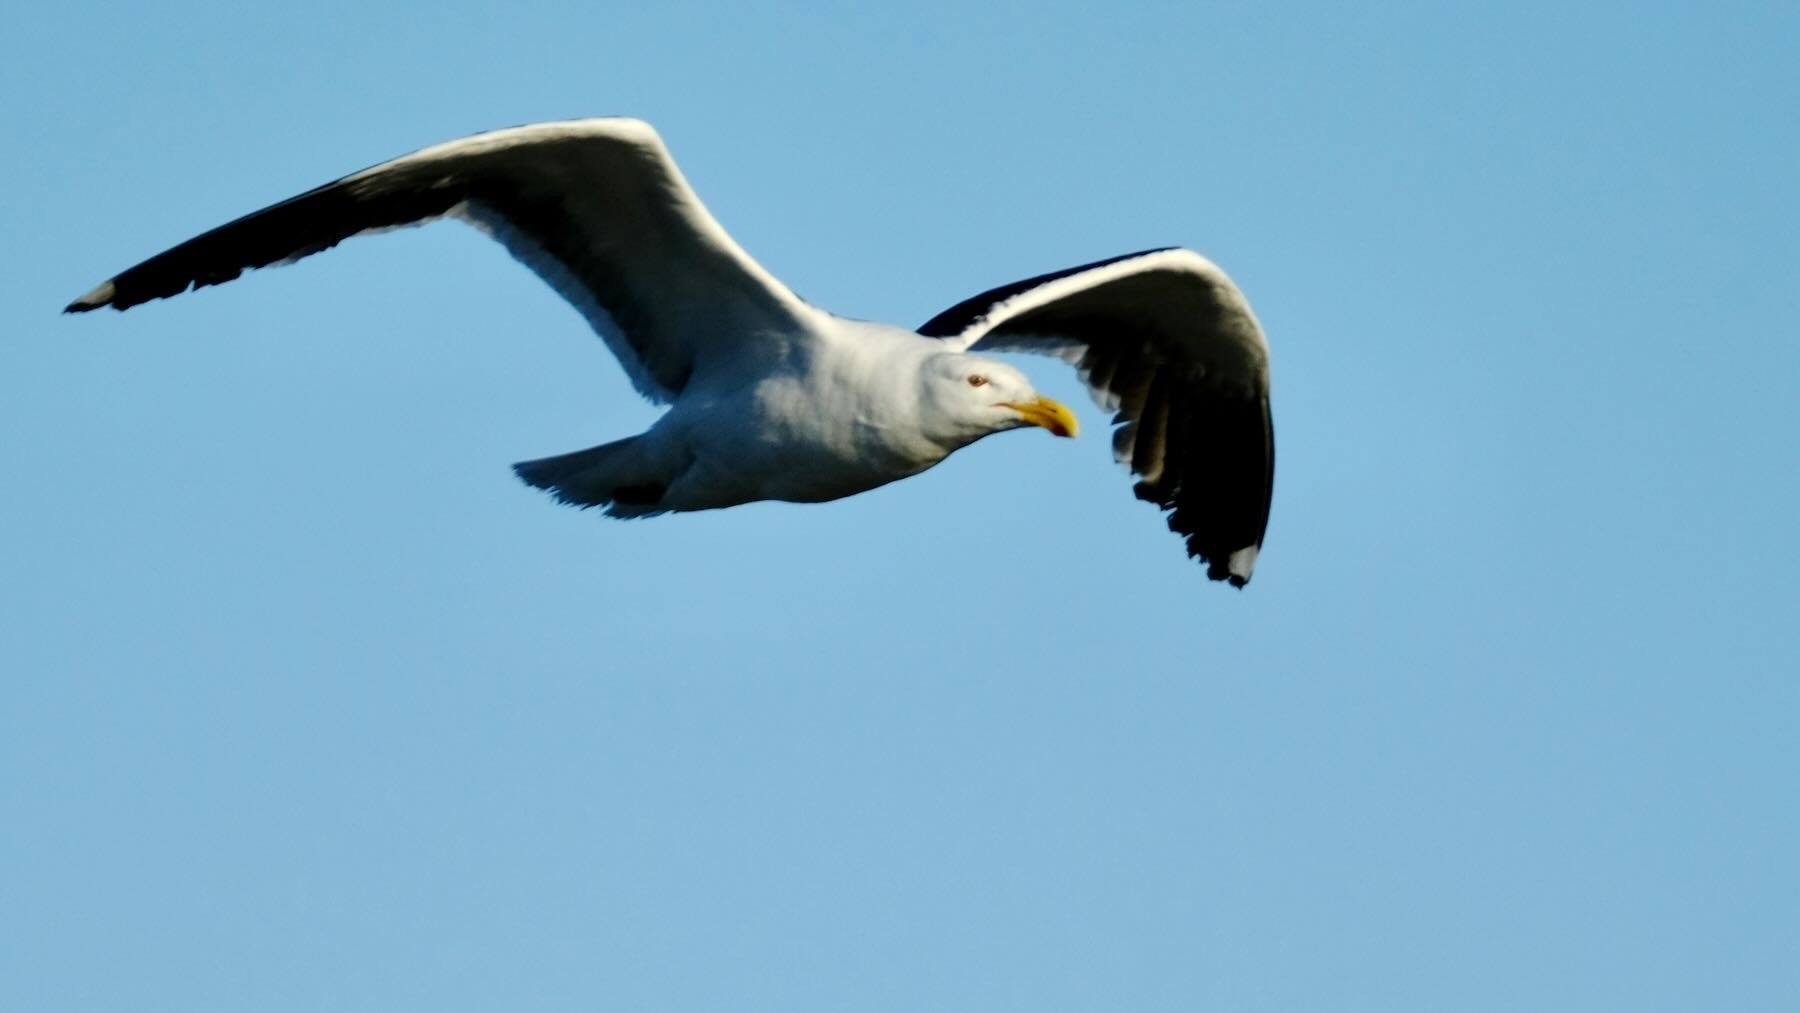 Black backed gull in flight with wings arced. 